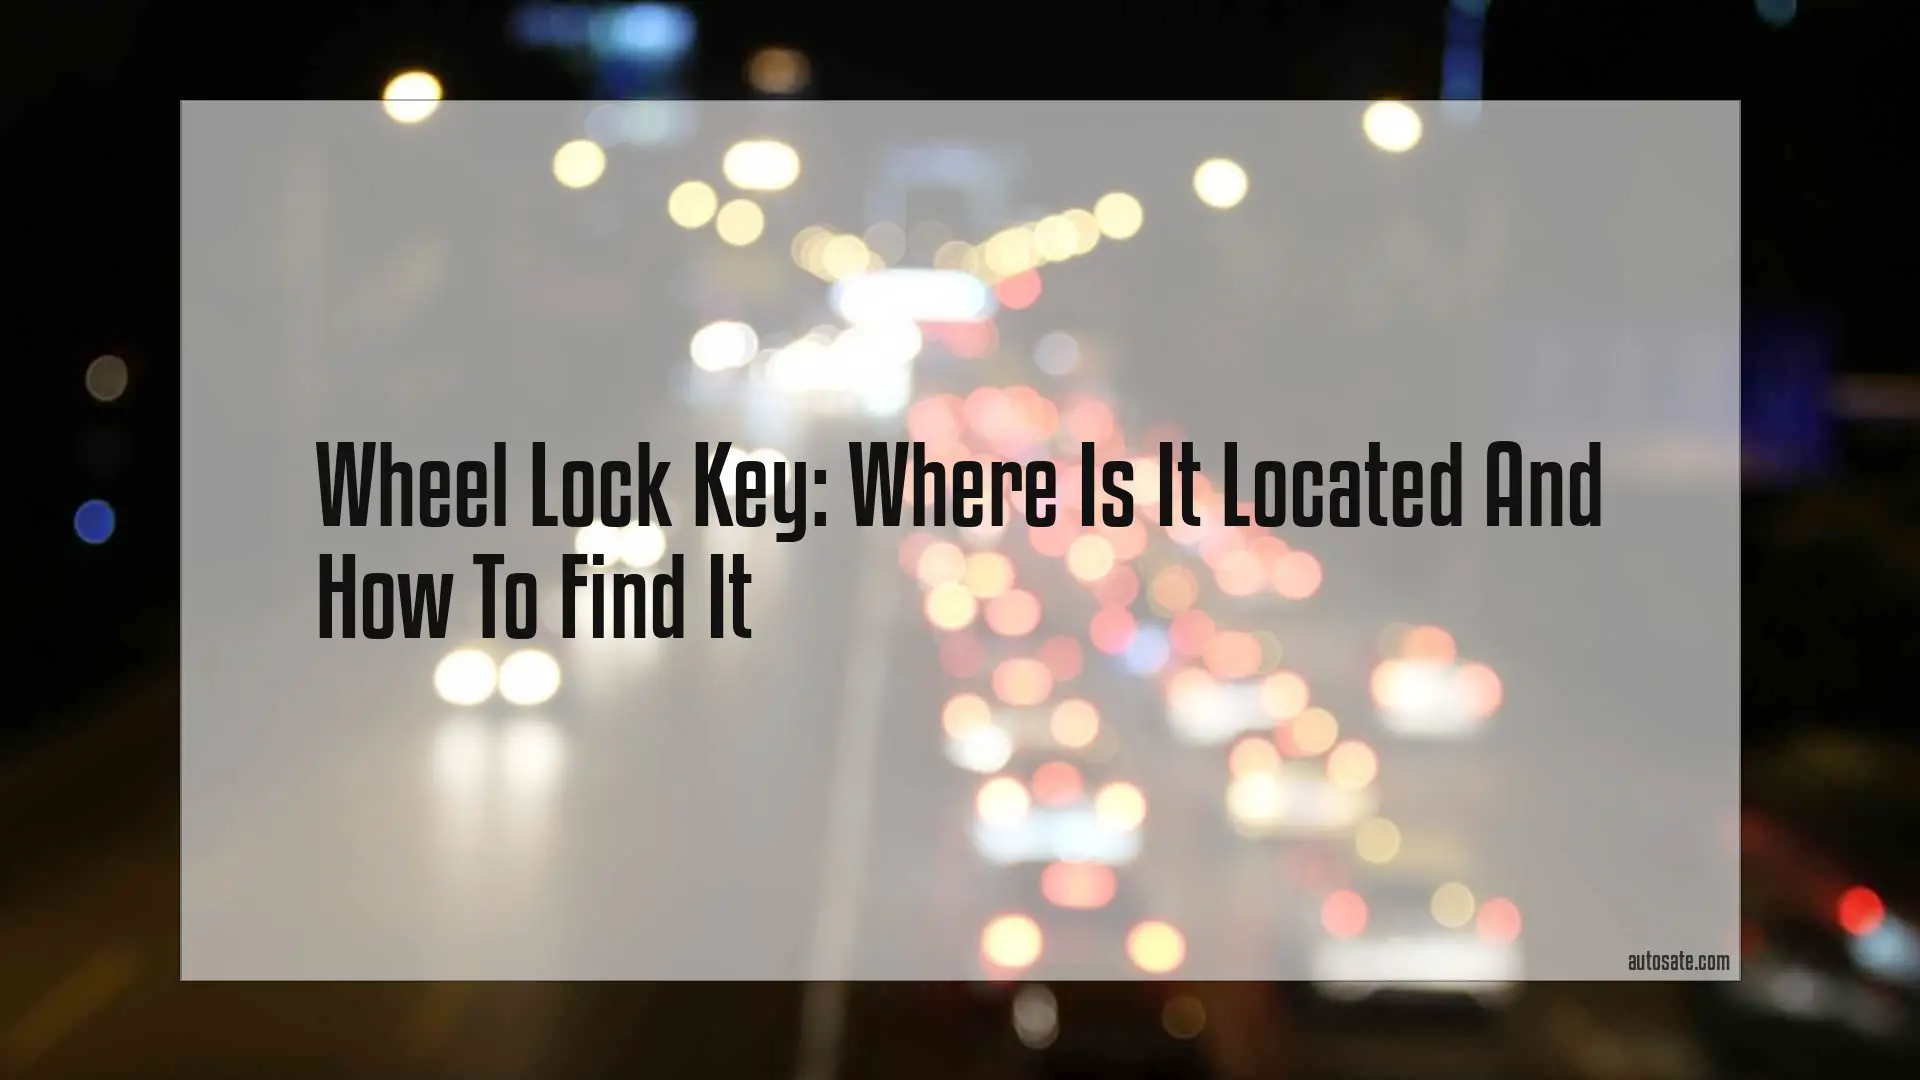 Wheel Lock Key: Where Is It Located And How To Find It